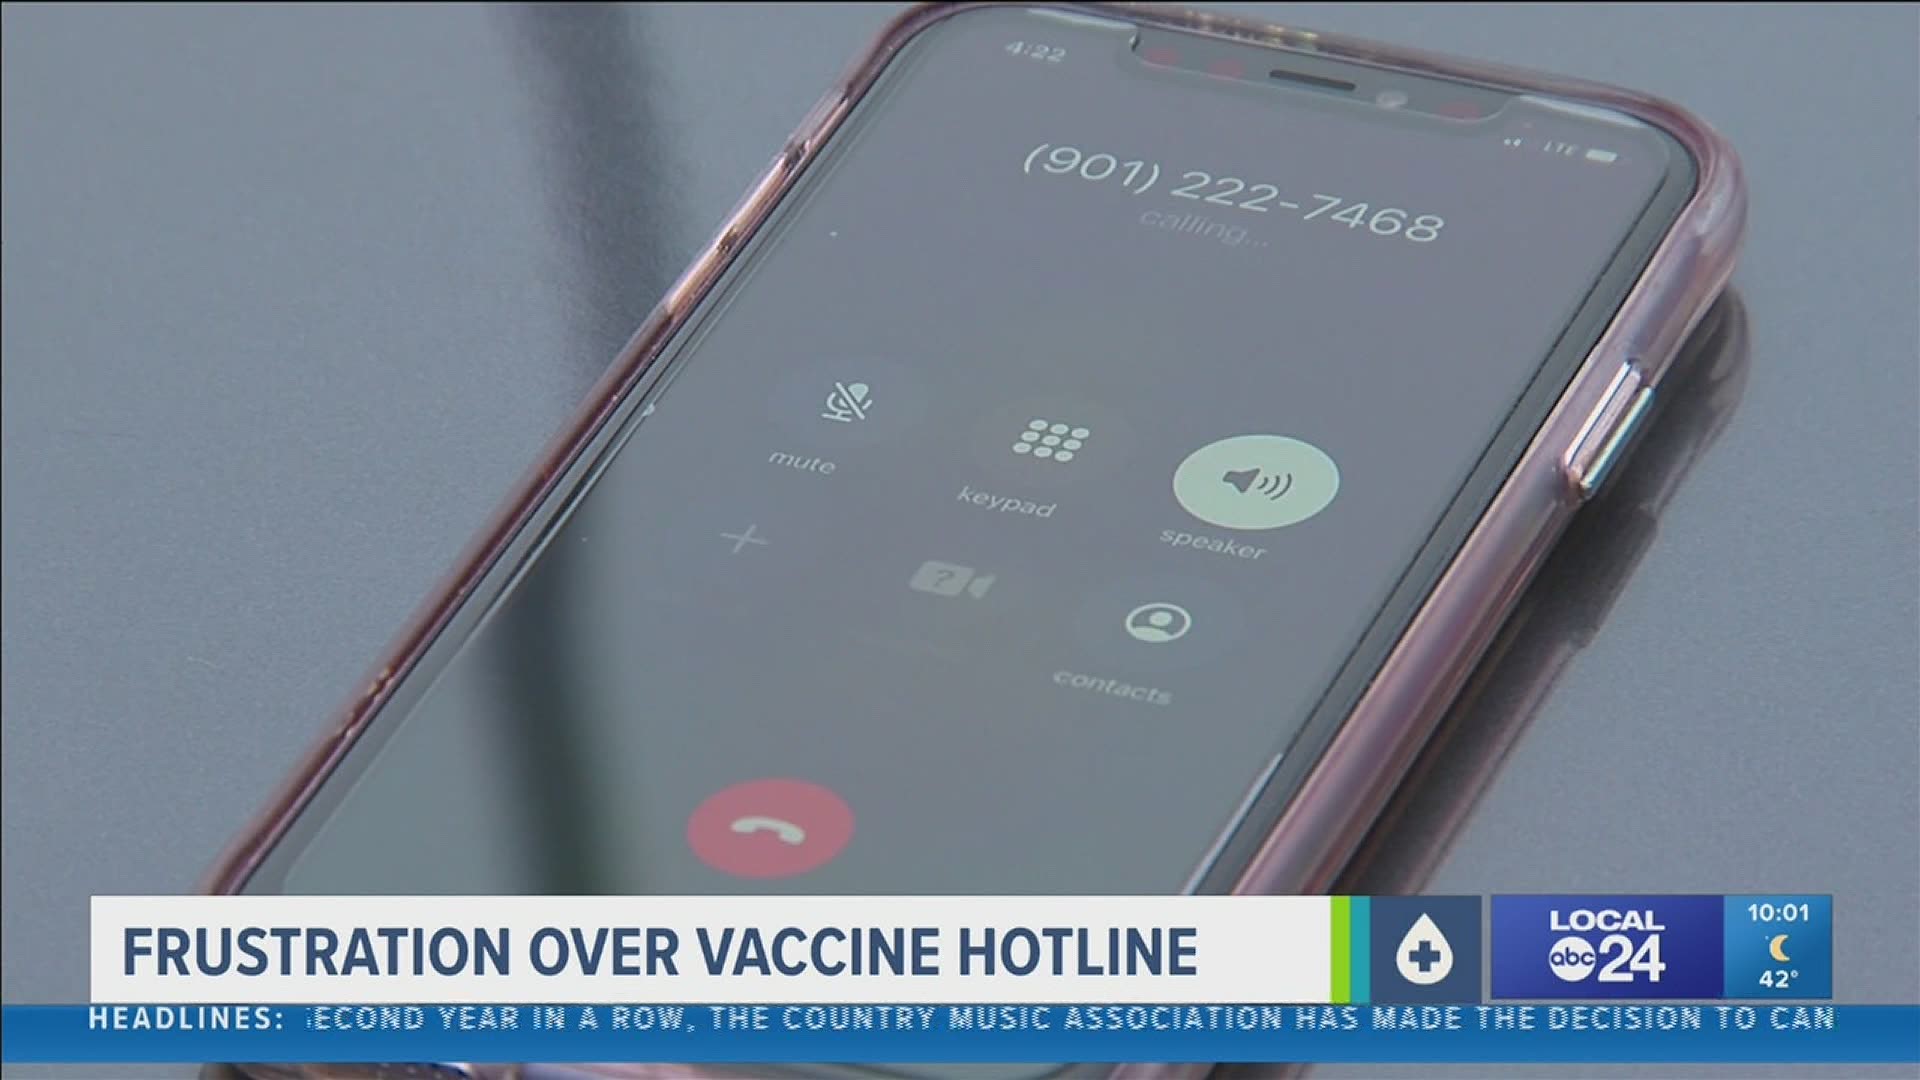 The City of Memphis is getting a call center to help with COVID-19 vaccine appointments over the phone.